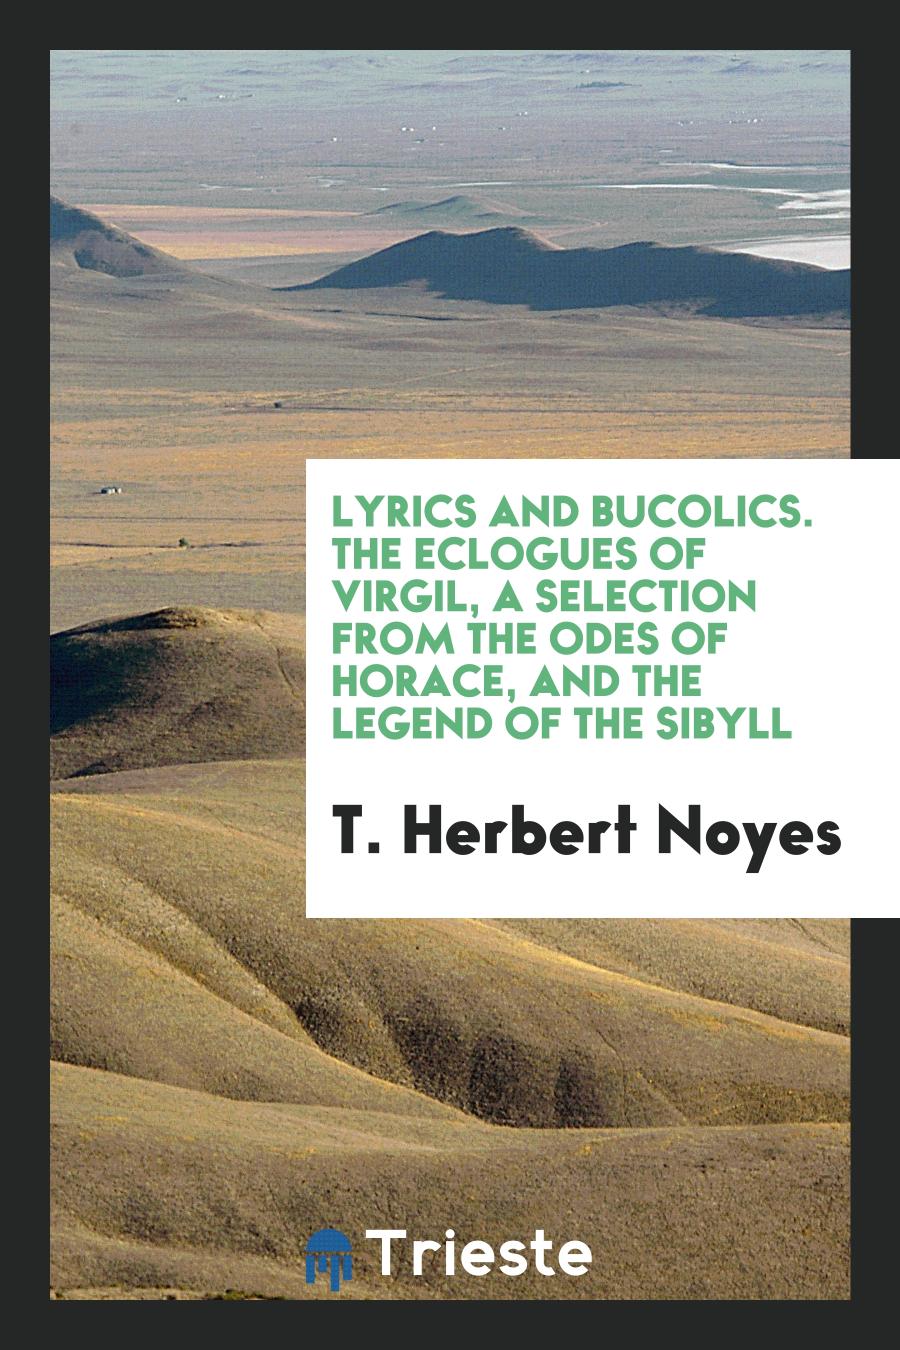 Lyrics and Bucolics. The Eclogues of Virgil, a Selection from the Odes of Horace, and the Legend of the Sibyll